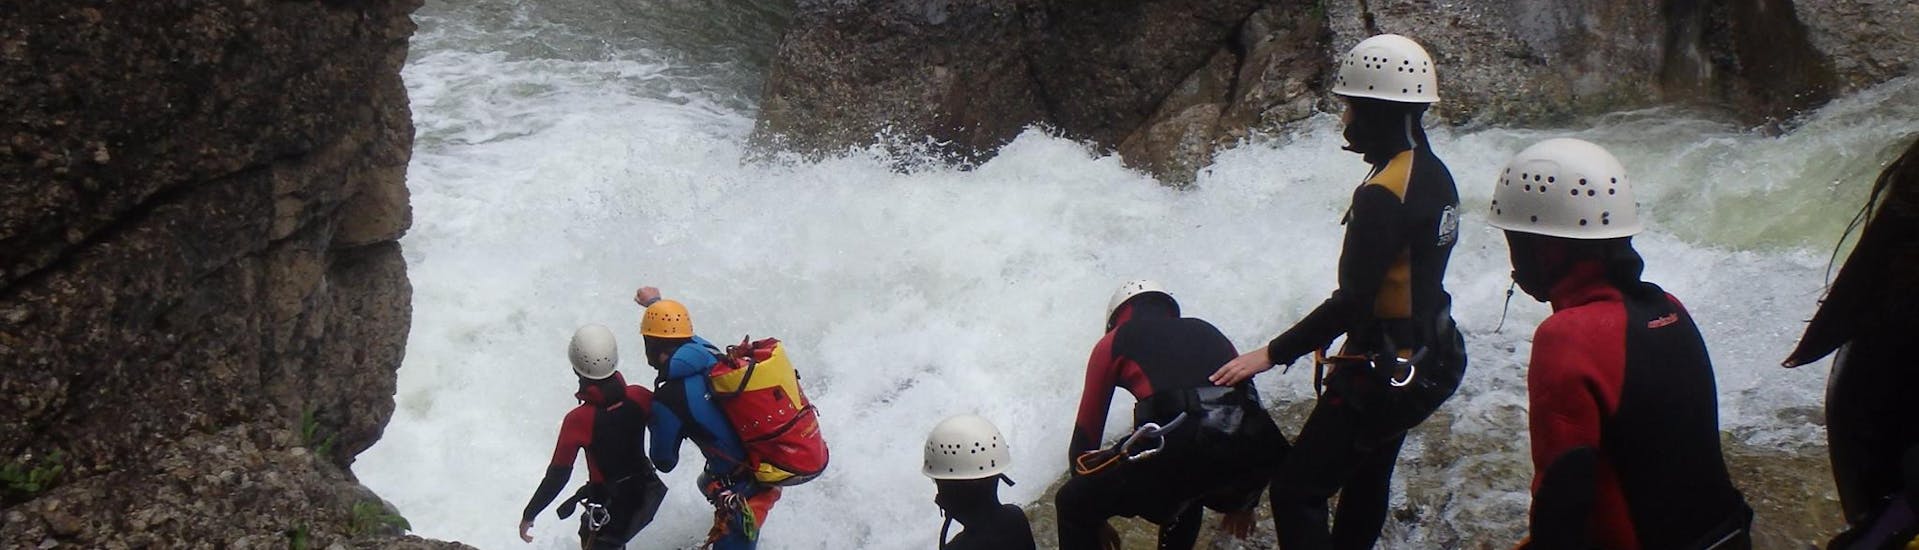 A group jumping in the water during Advanced Canyoning in Allgäu with Outdoorzentrum Allgäu.